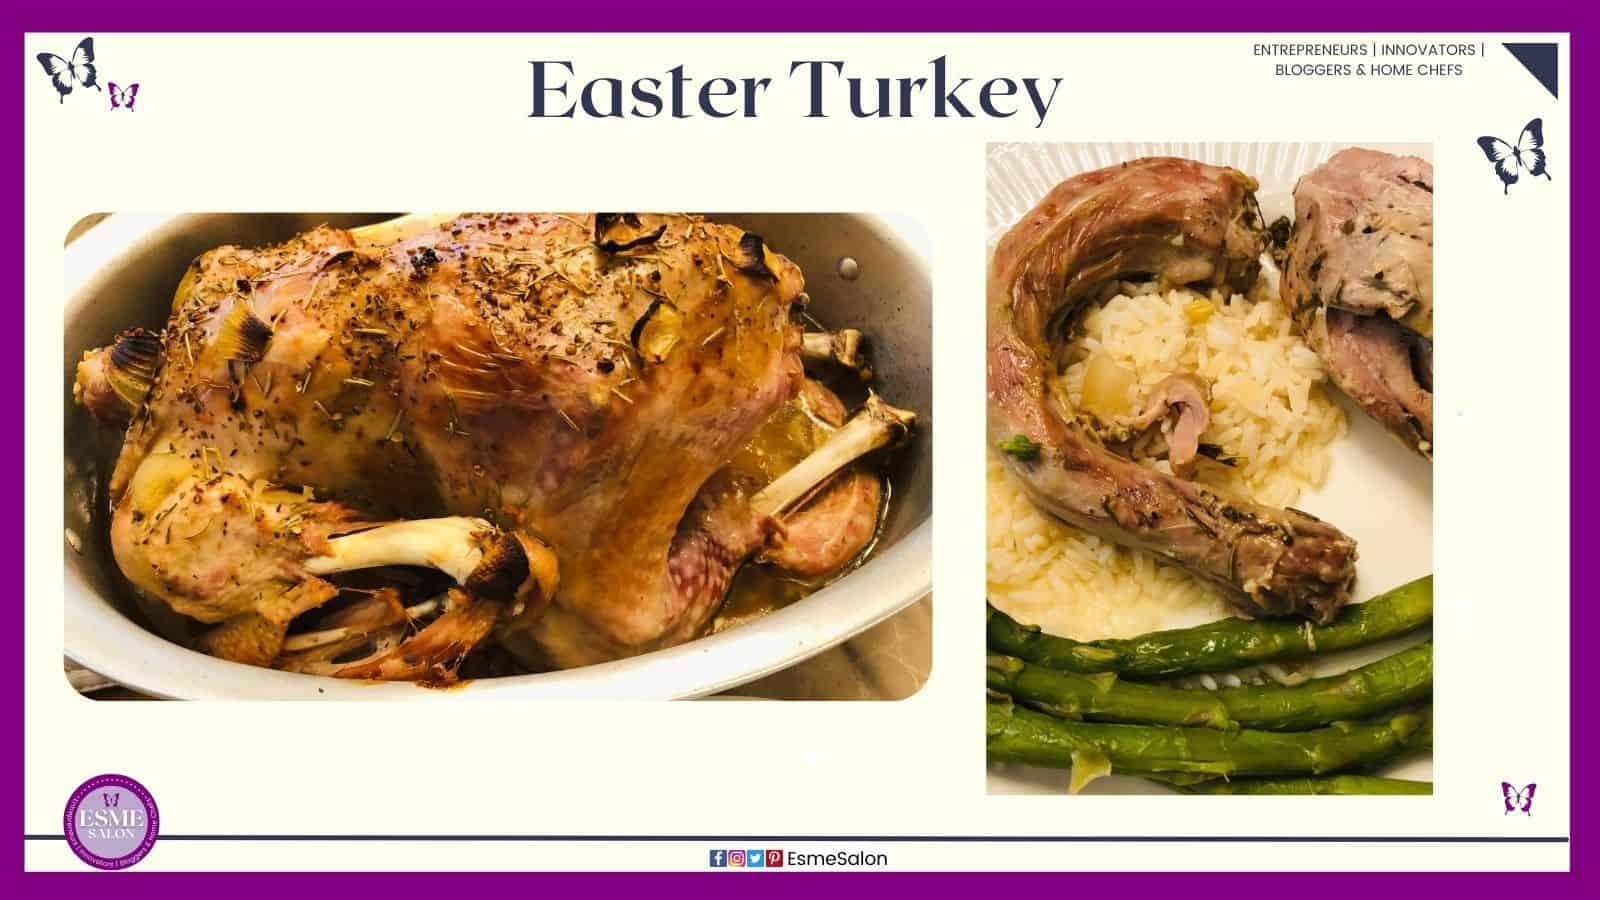 an image of a fully cooked Easter Turkey dinner in the baking pan as well as served